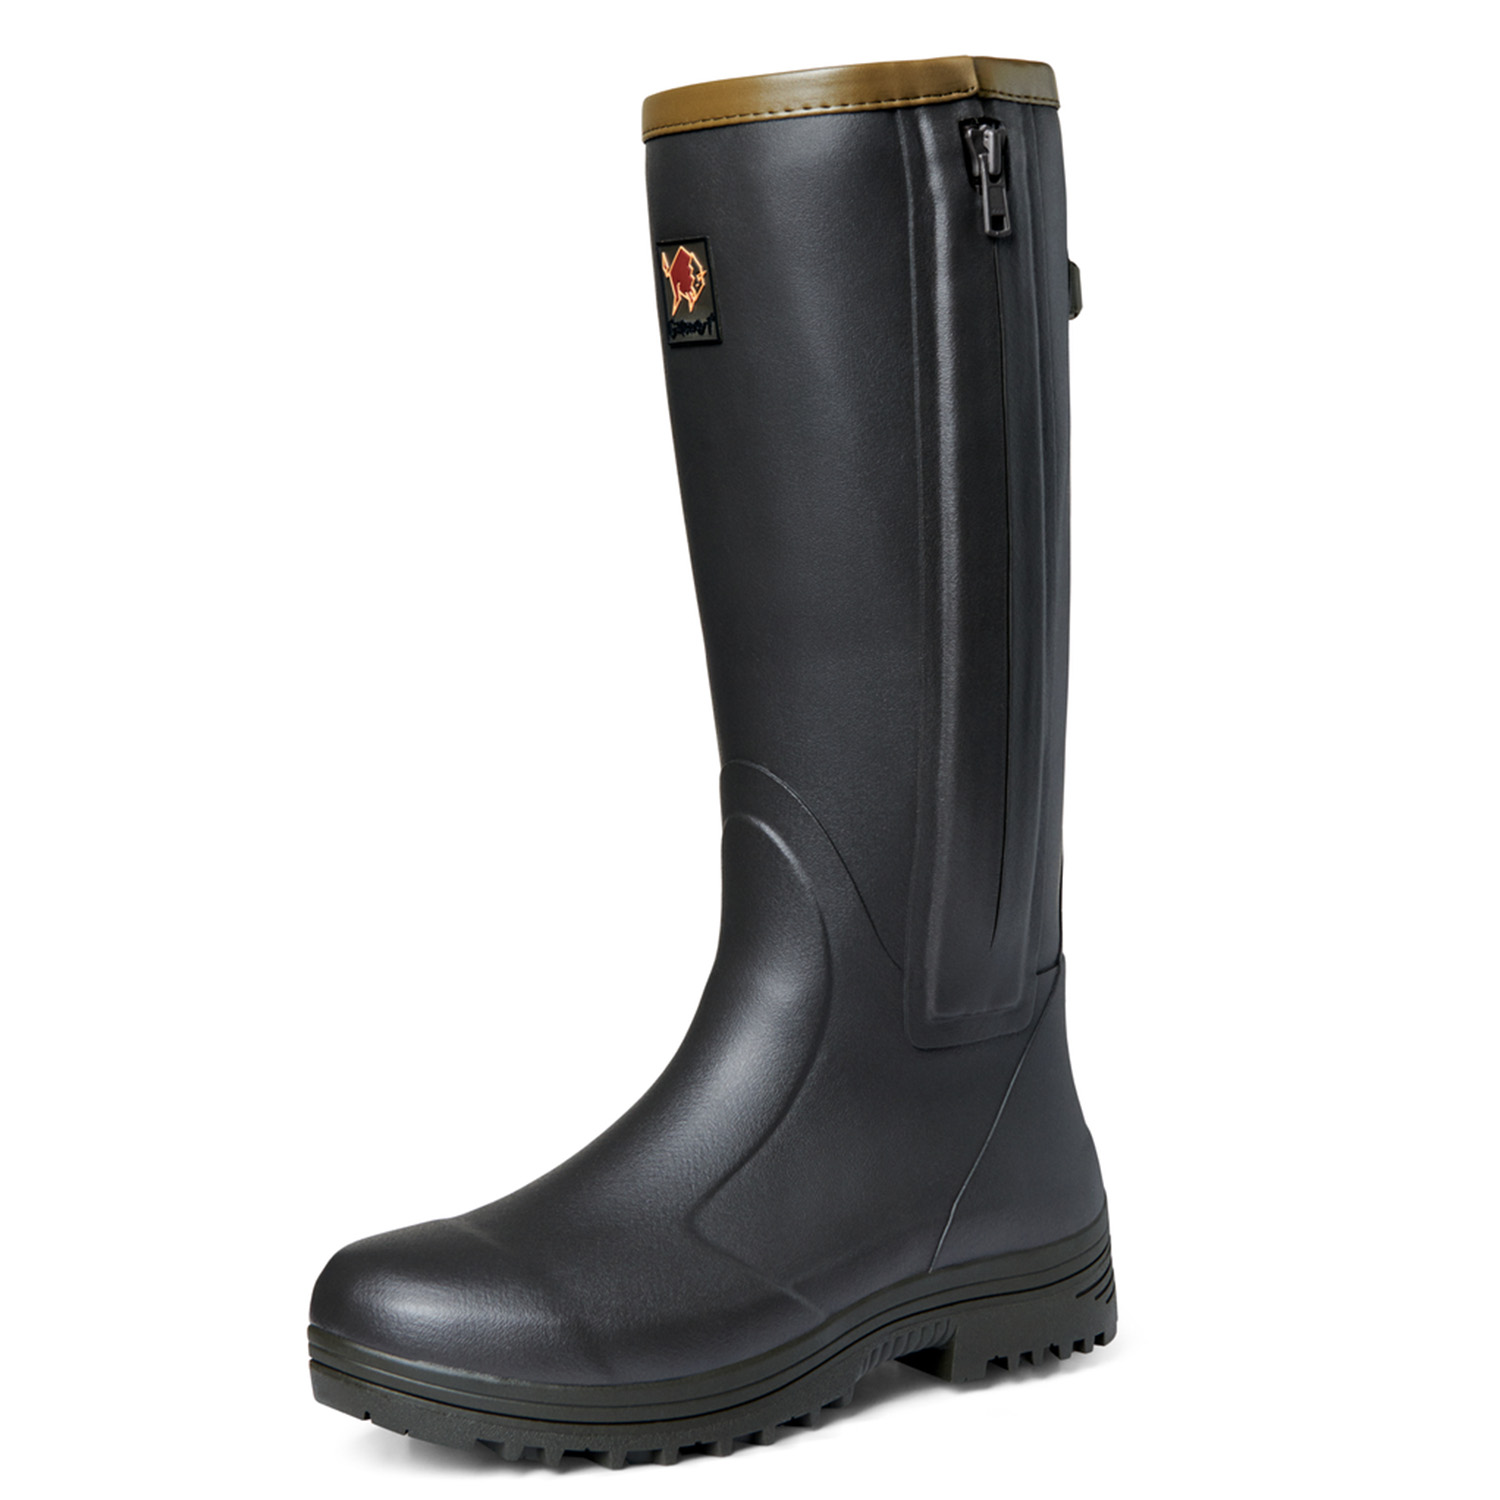 Gateway1 Rubber Boots Pheasant Game 18 leather - Hunting Boots